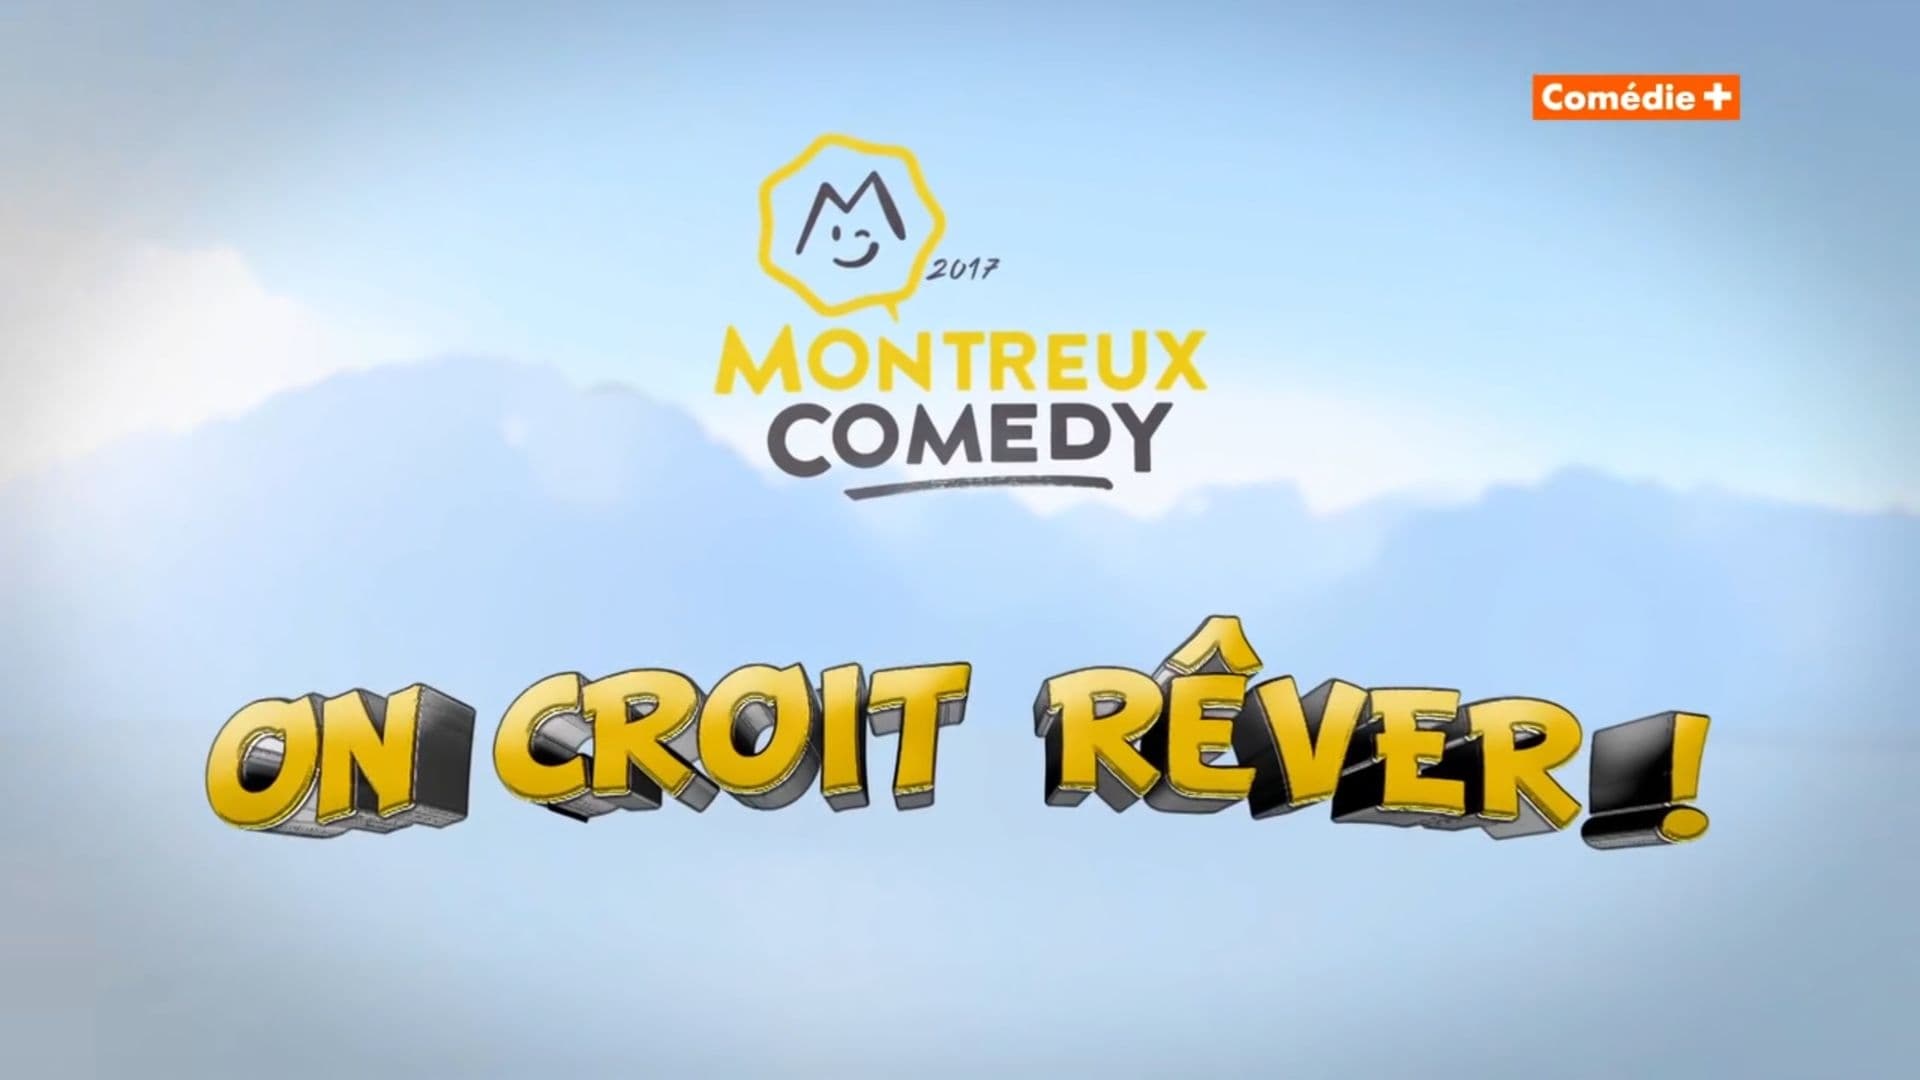 Montreux Comedy Festival 2017 - On croit rêver